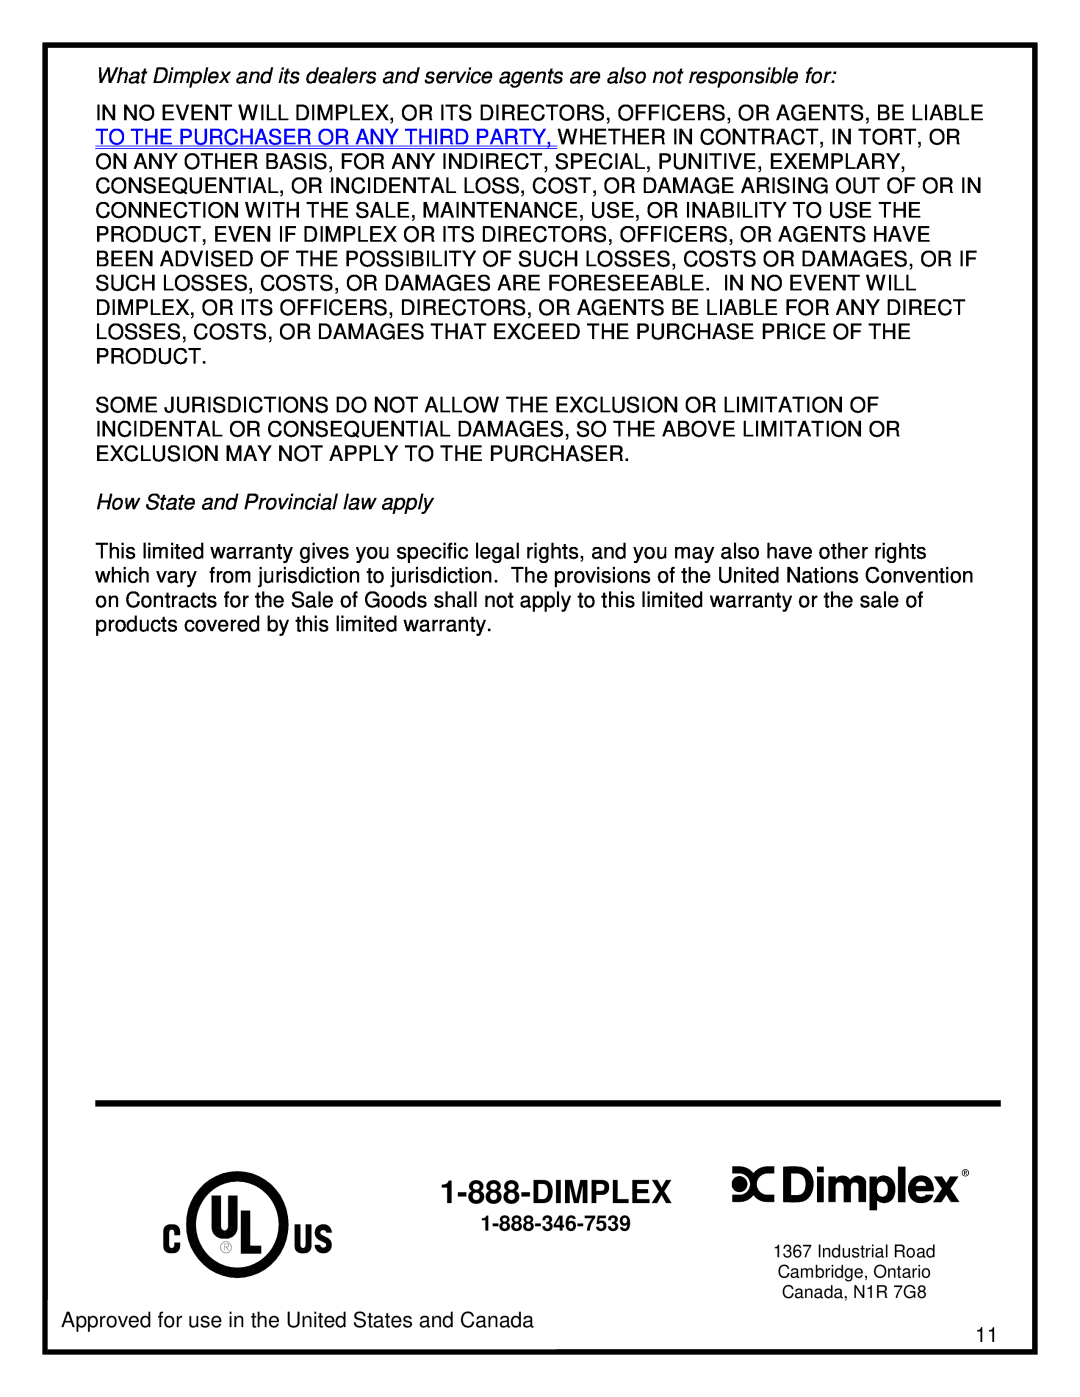 Dimplex BF33ST, DX BF39ST, DX BF45STDX manual Dimplex, How State and Provincial law apply 